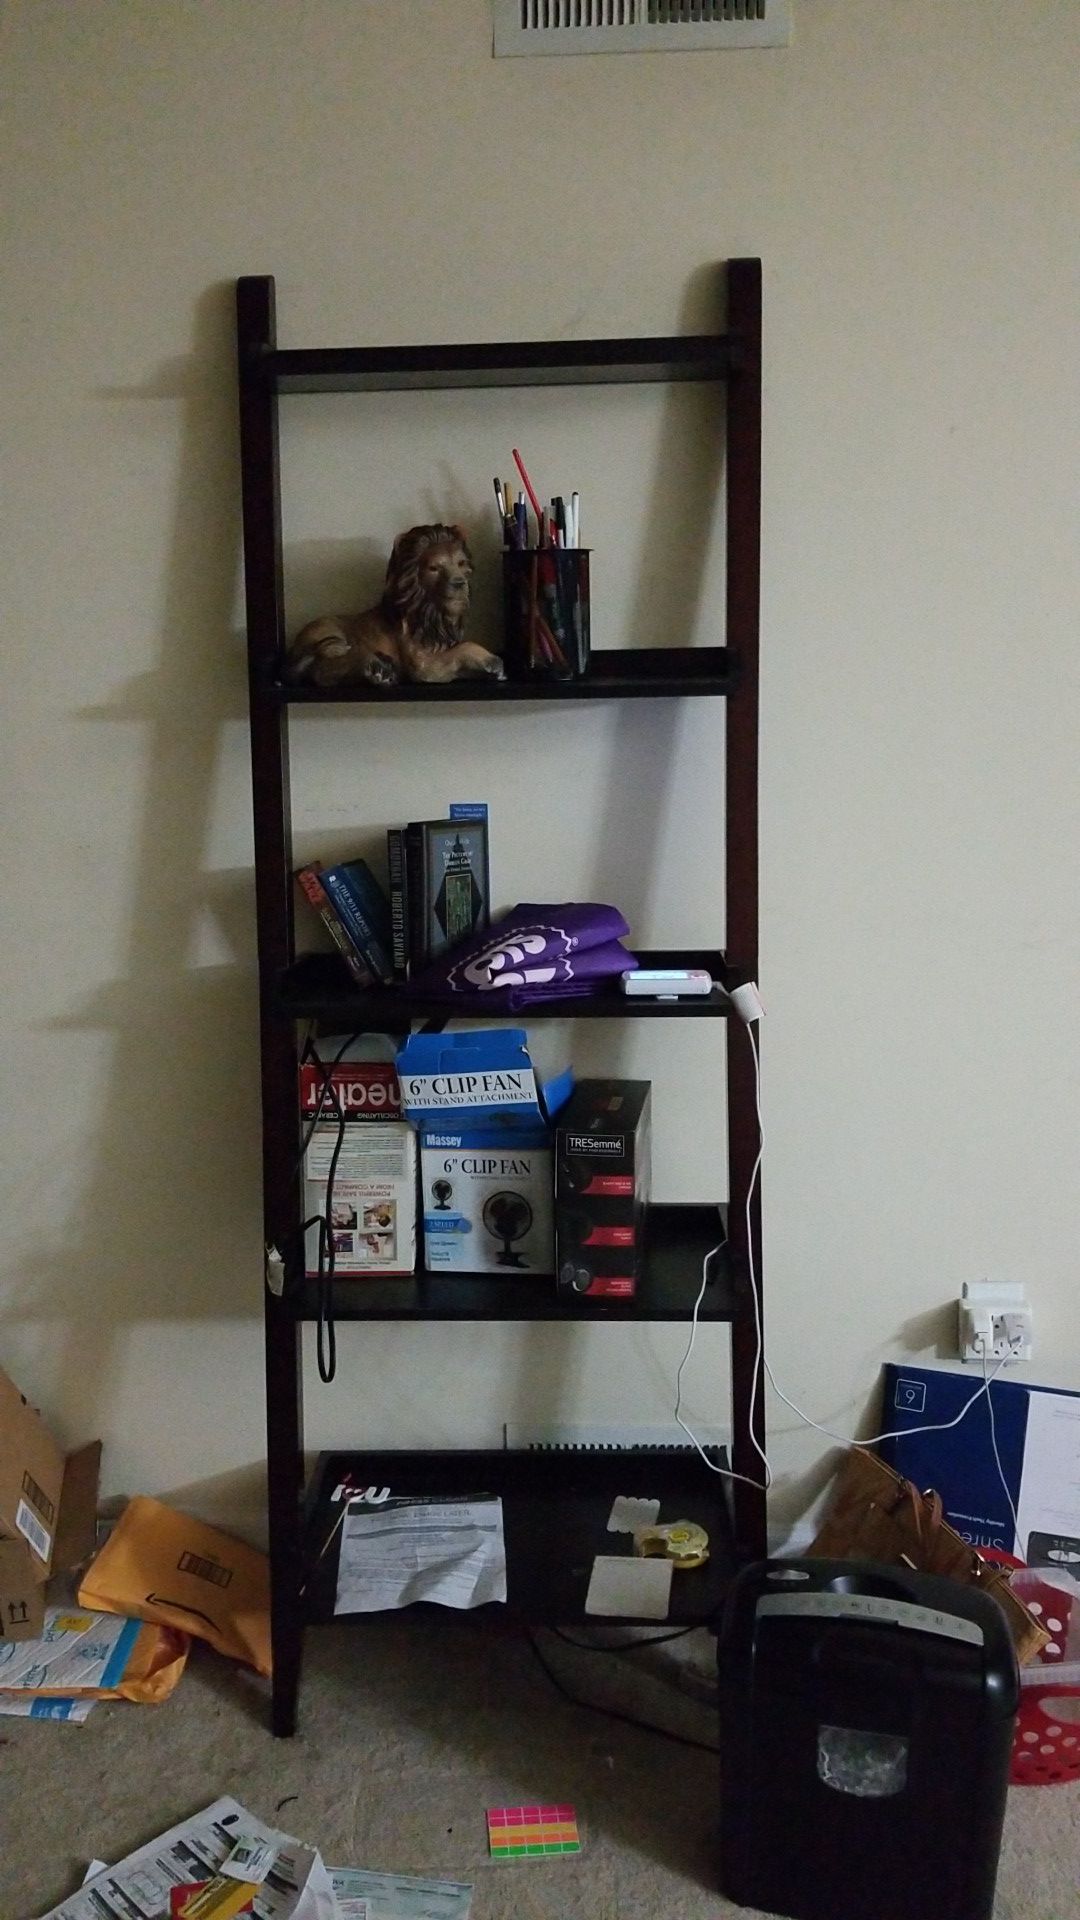 Ladder book shelf (free, first come first serve) needs to go before 2:00 PM